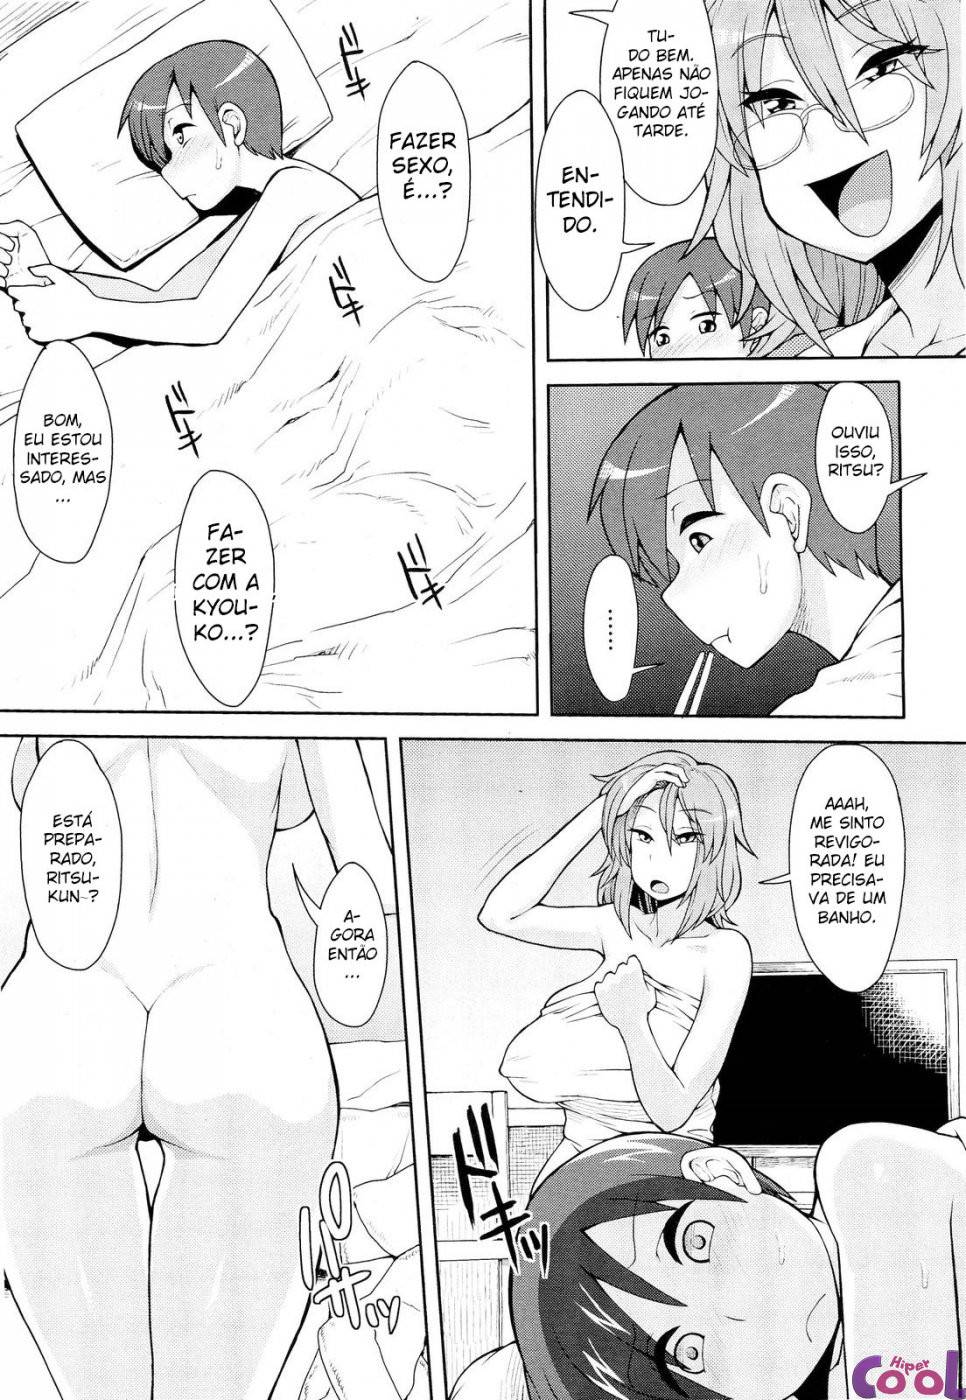 erohon-to-boku-to-neet-onee-chan-or-porn-mags-me-and-the-neet-onee-chan-chapter-01-page-14.jpg